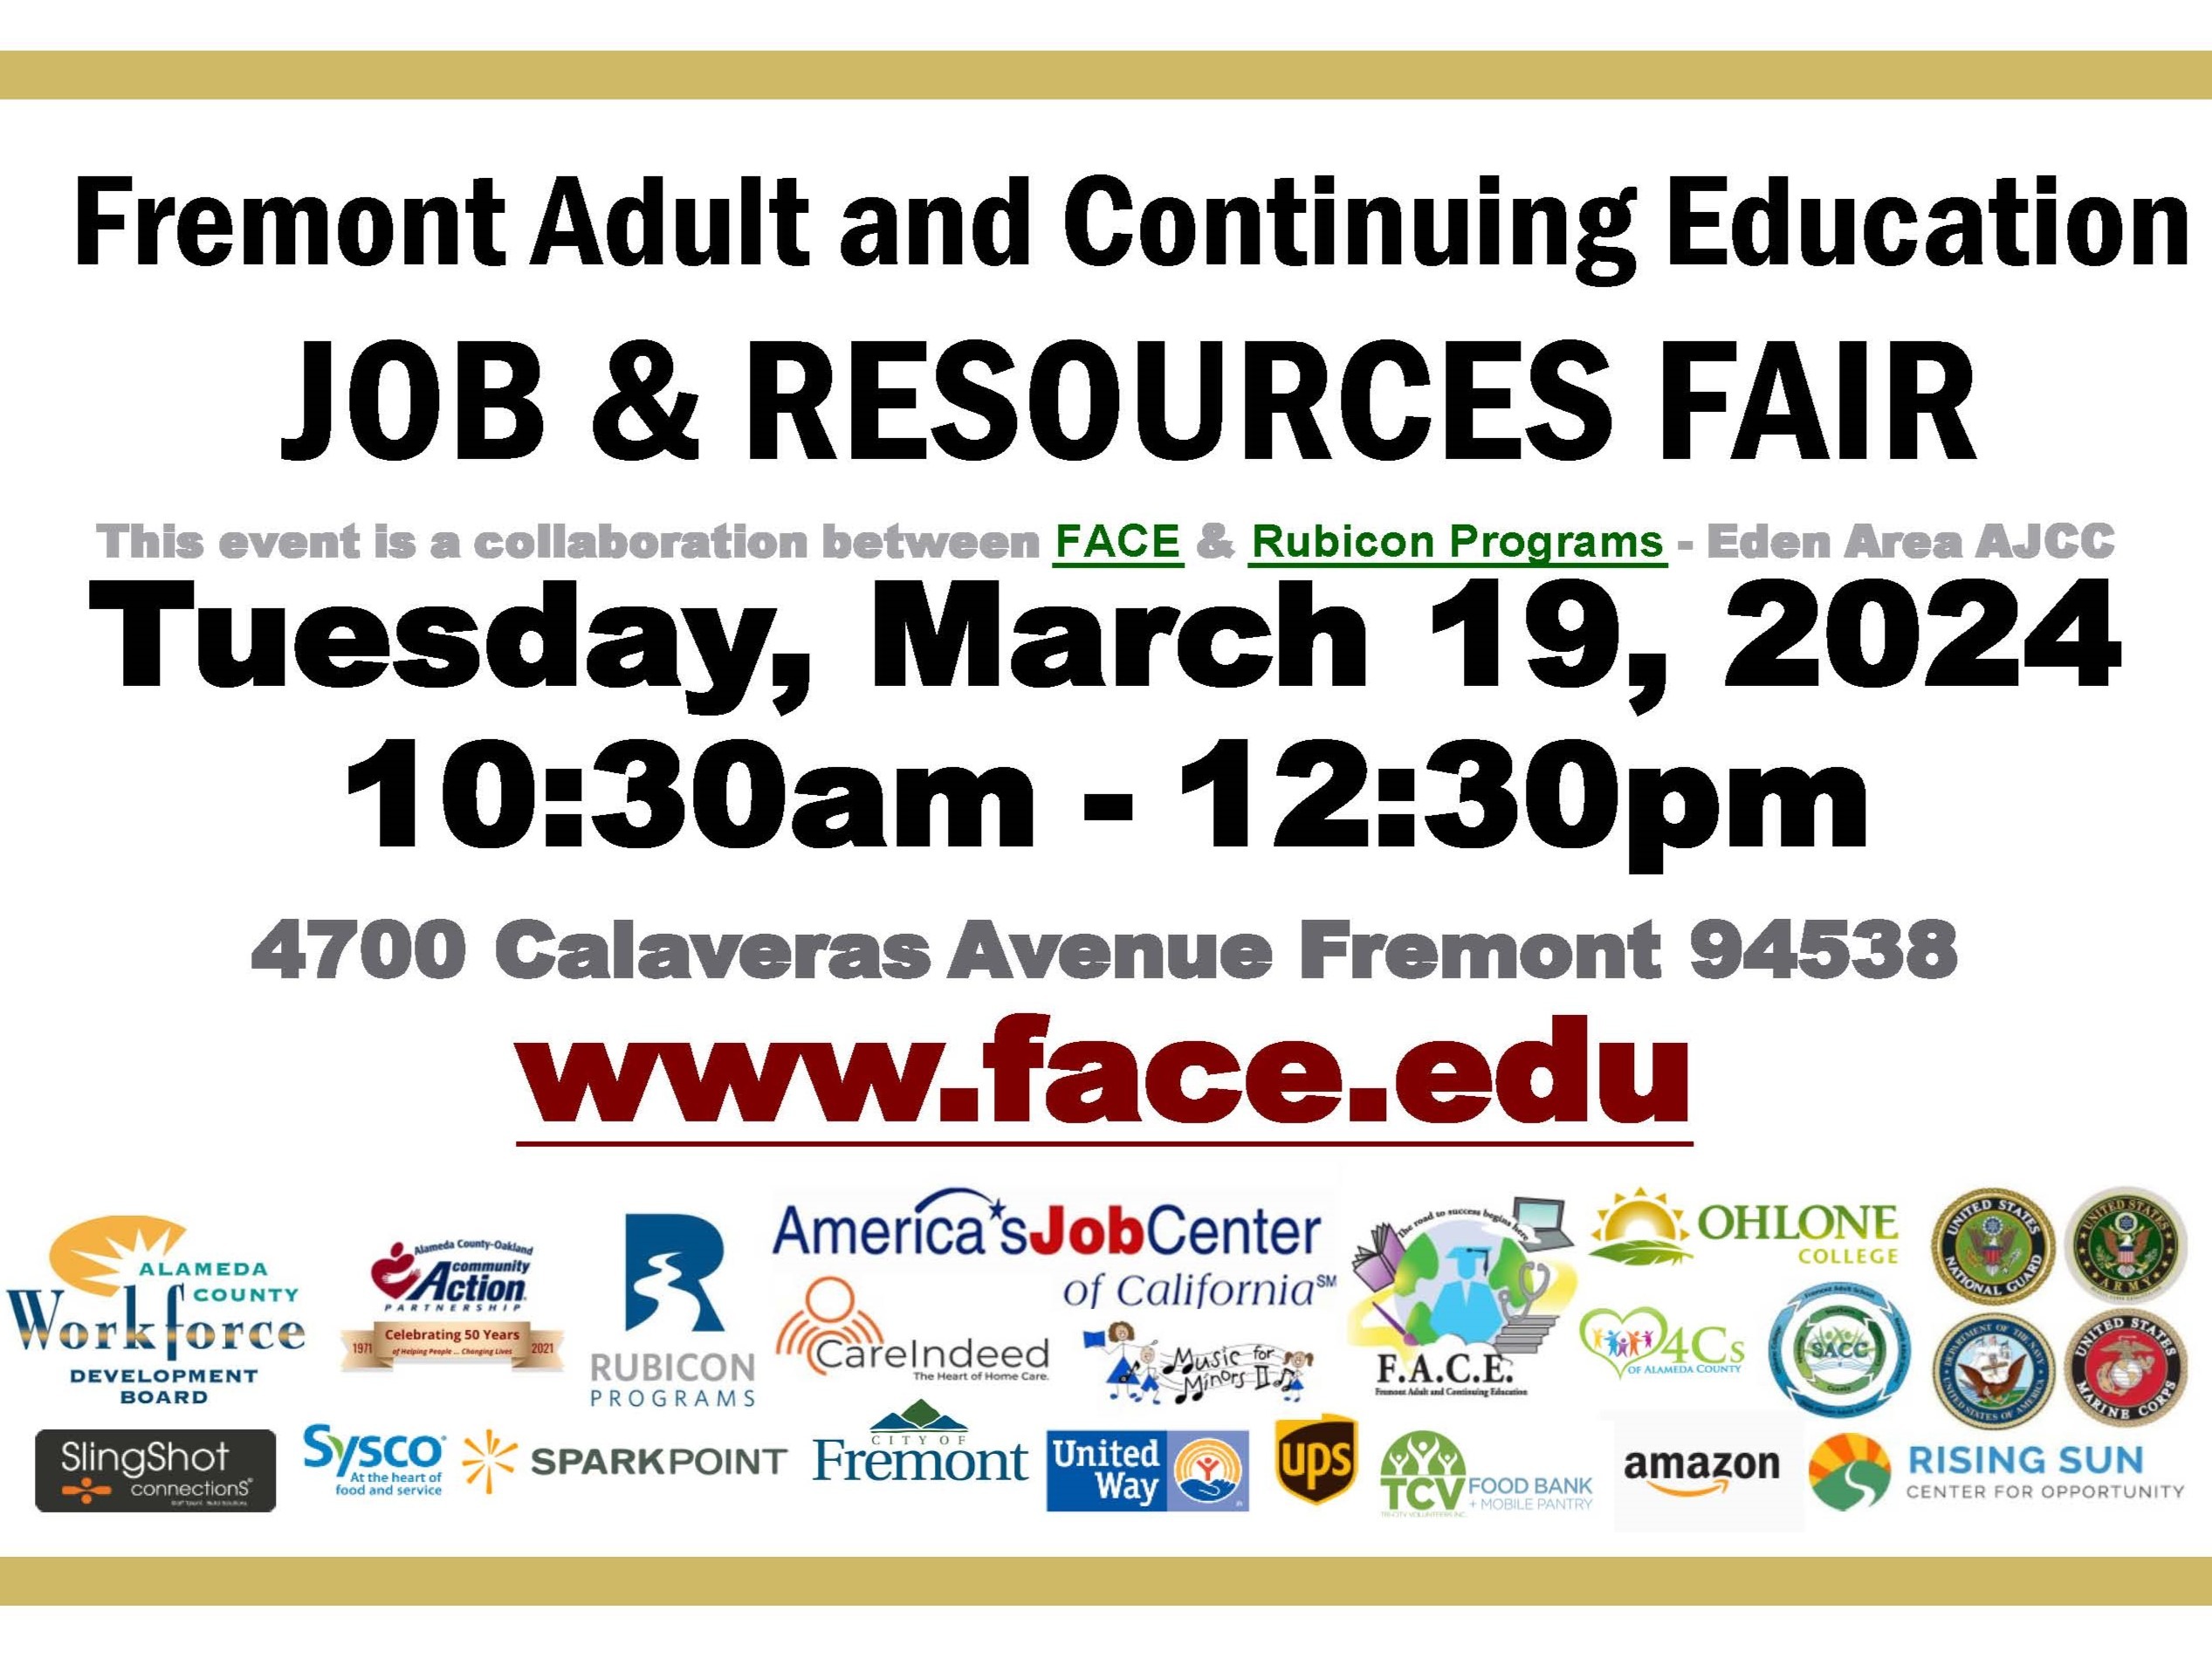 Fremont Adult and Continuing Education Job & Resource Fair